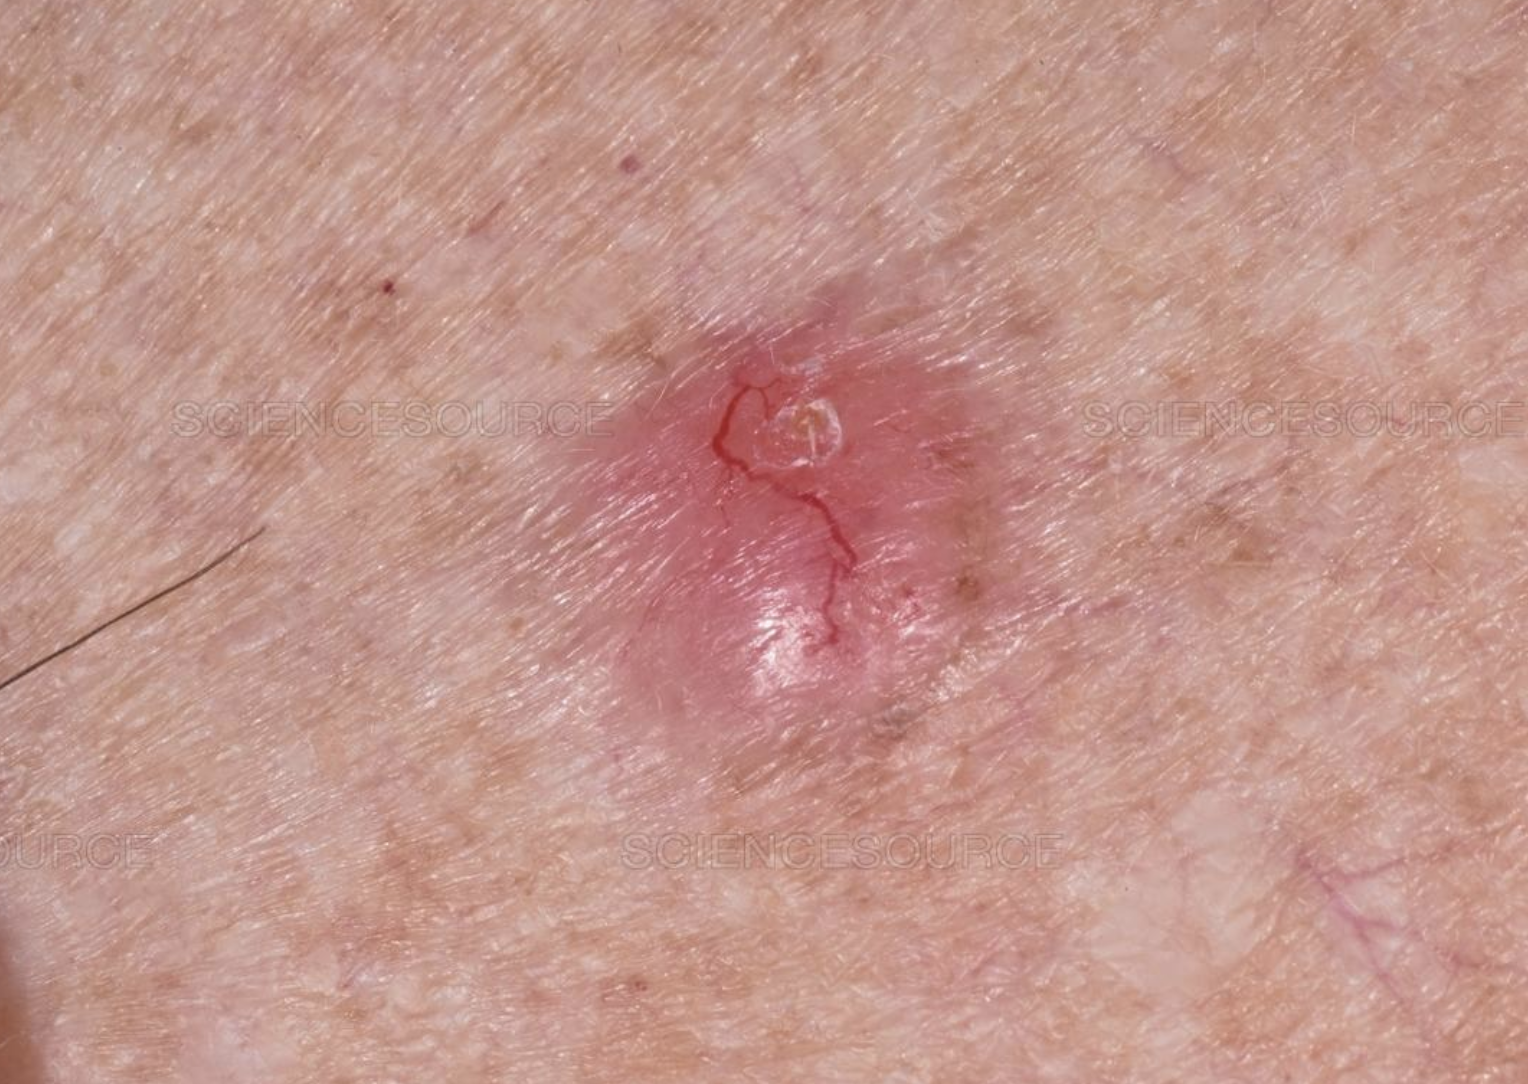 basal cell carcinoma BCC